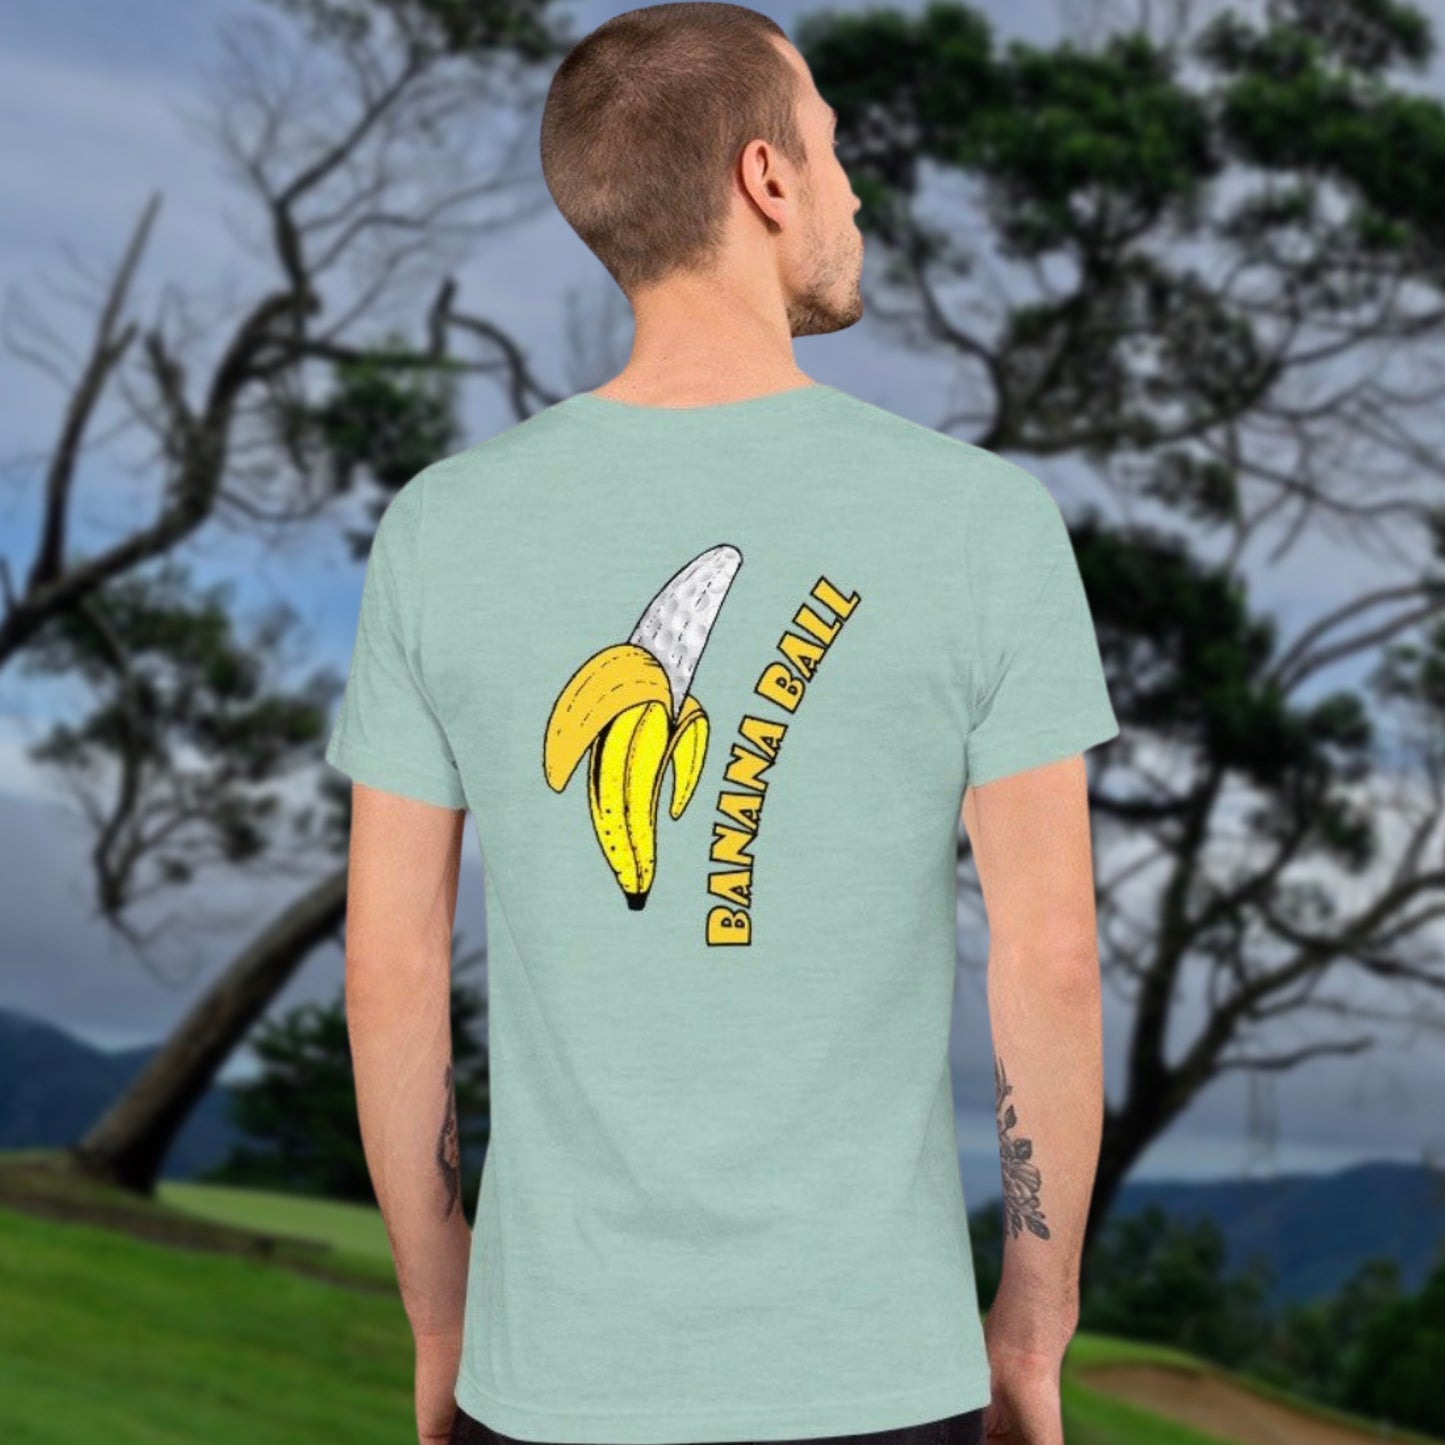 mockup of a man wearing the banana ball t-shirt on a golf course